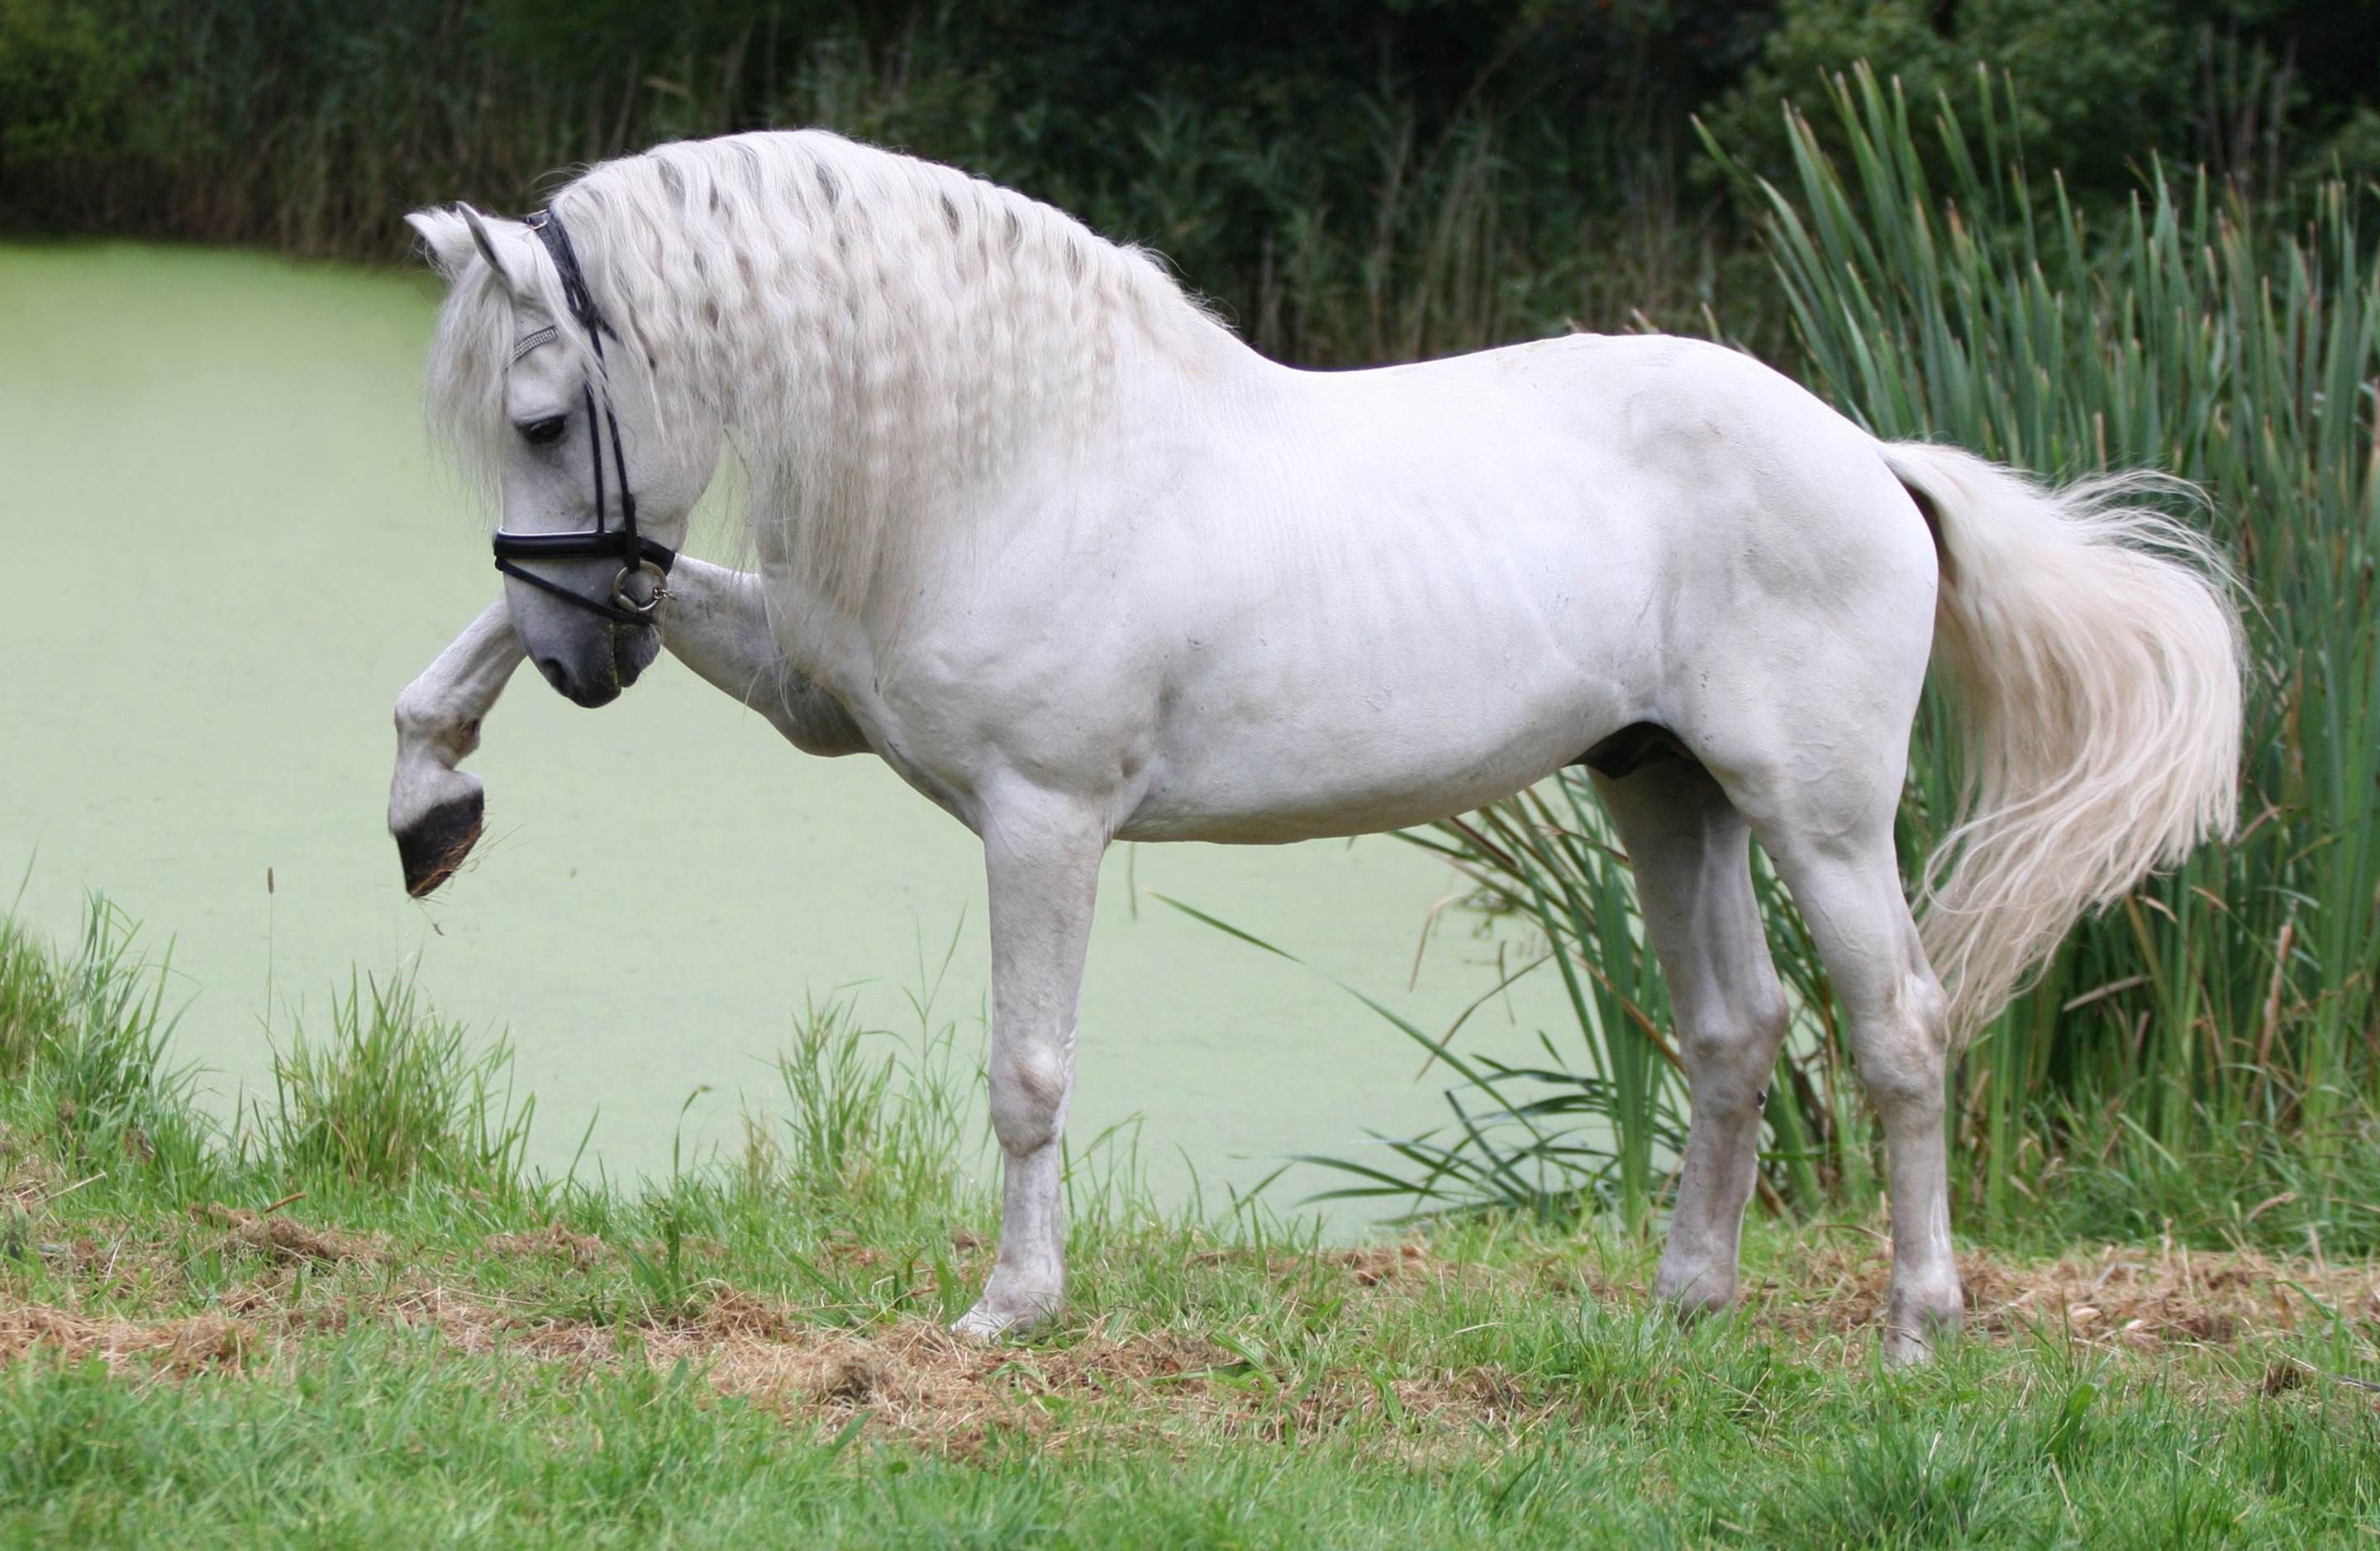 Magnificent White Andalusian Horse Wallpaper. Andalusian horse, Horse wallpaper, Horses